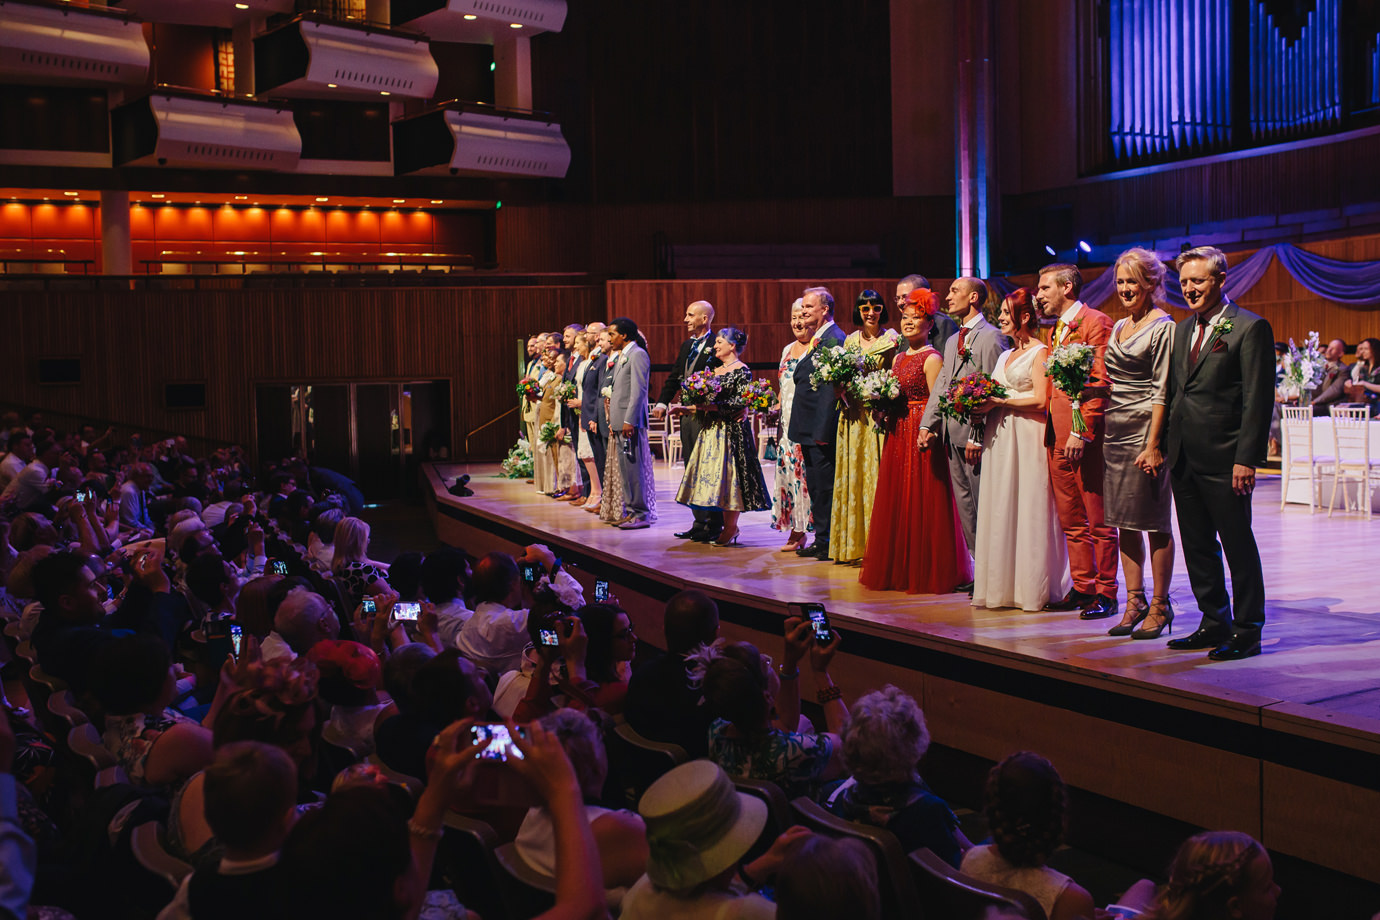 Married couples on stage, Festival of Love, Royal Festival Hall, London